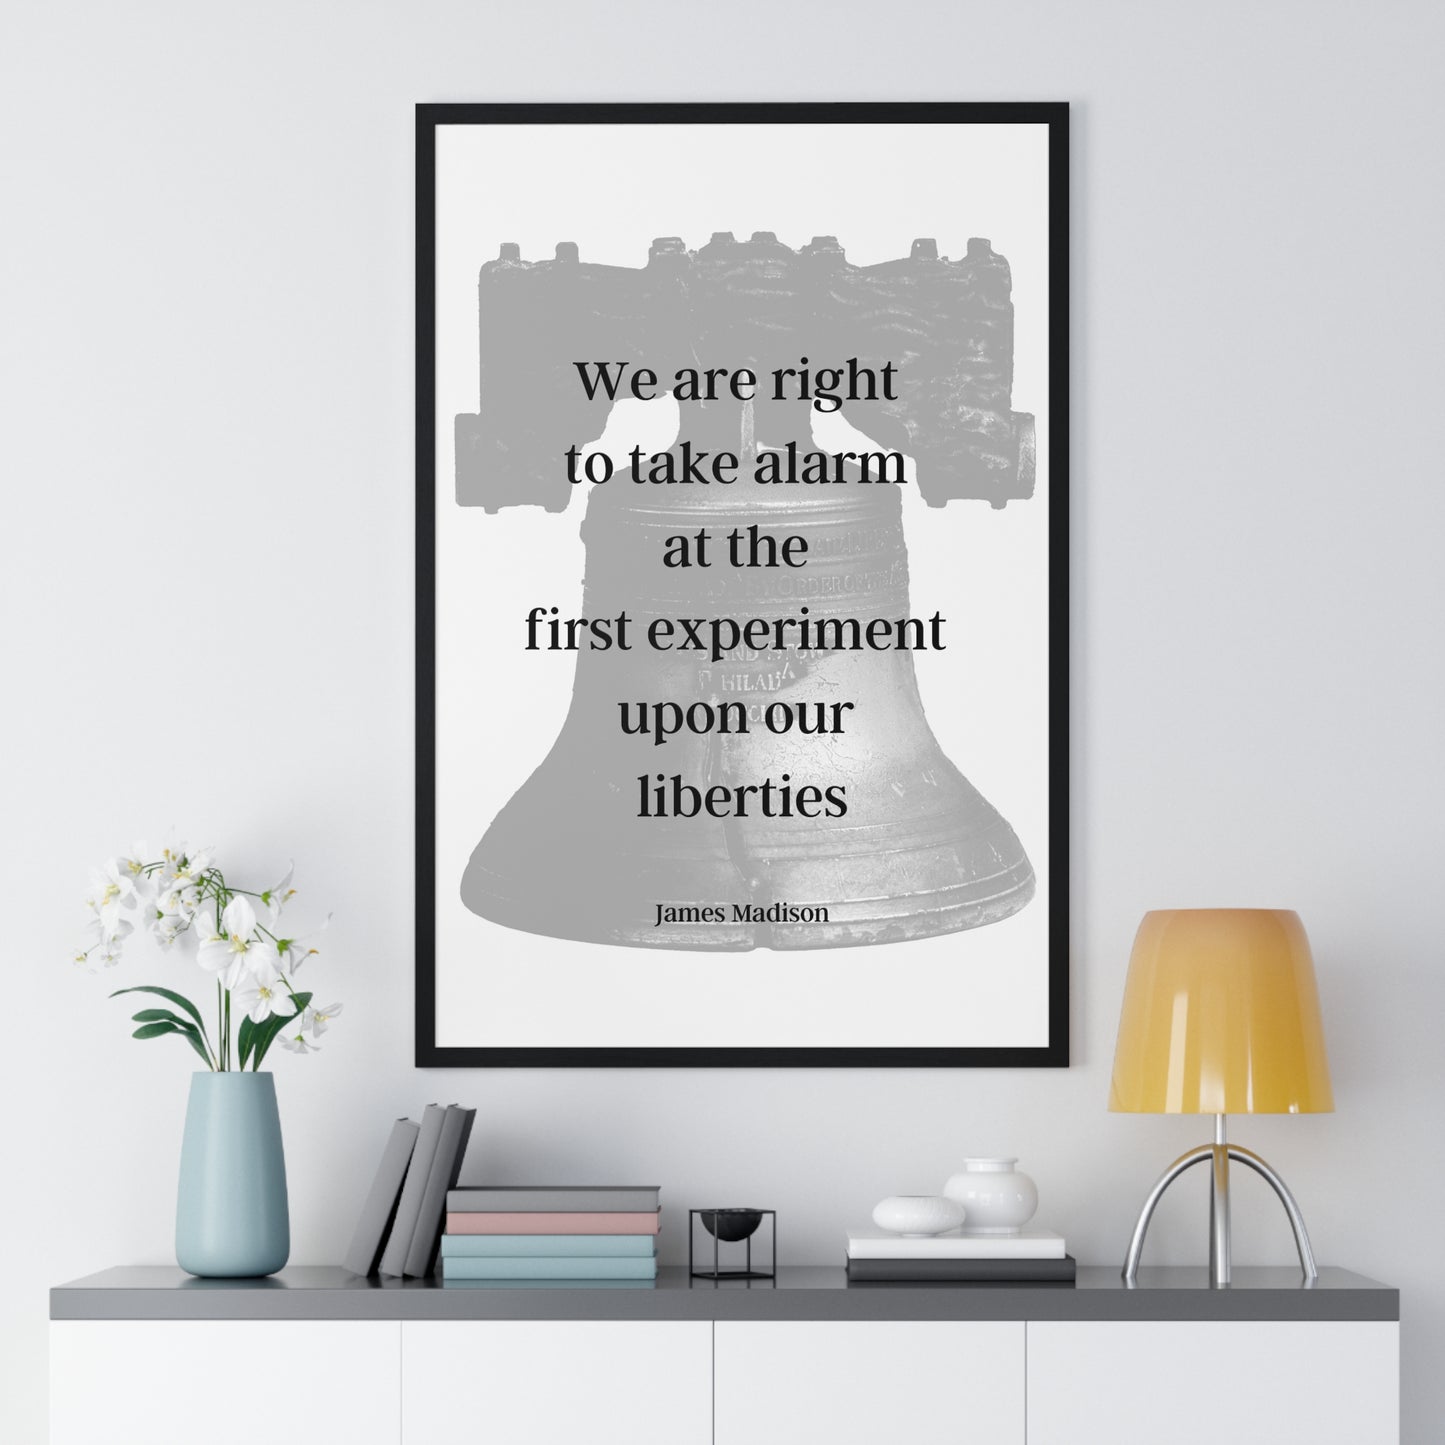 James Madison Quote 4, Poster Art, Light Print, 4th President of the United States, American Patriots, Liberty Bell, Freedom, Justice, Political Art, Poster Prints, Presidential Quotes, Inspirational Quotes